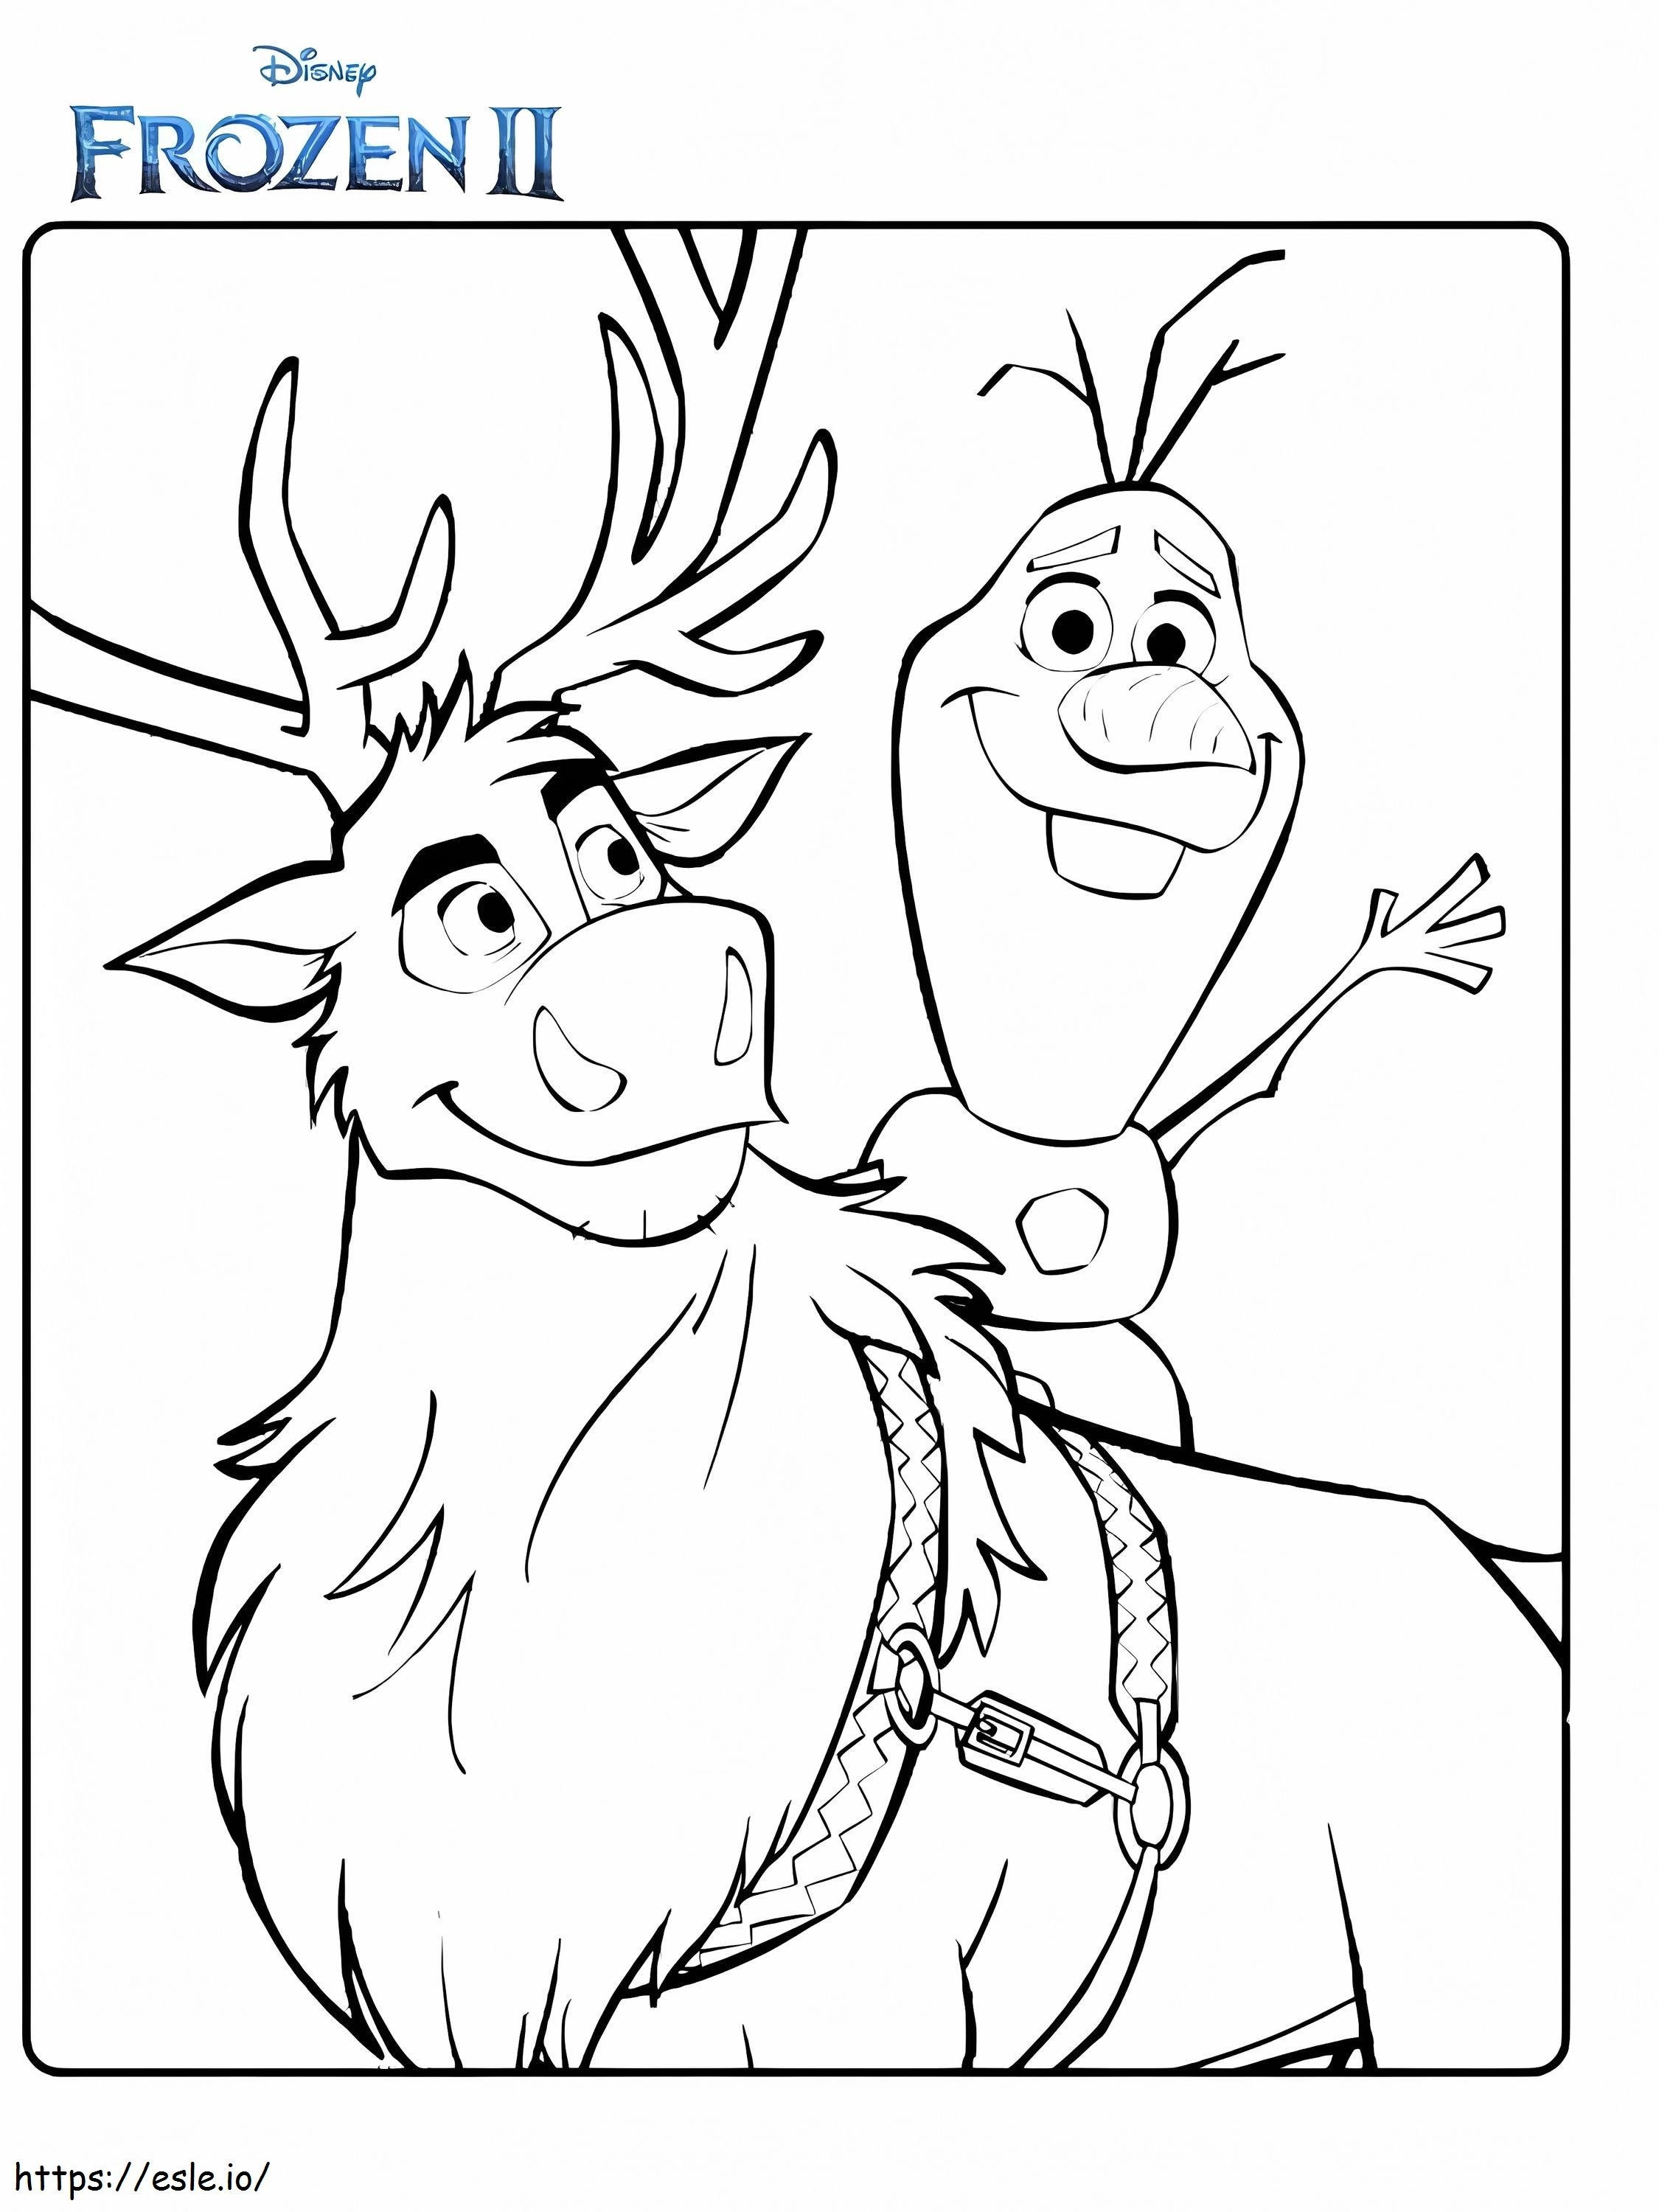 Olaf And Sven Frozen 2 Coloring Page coloring page